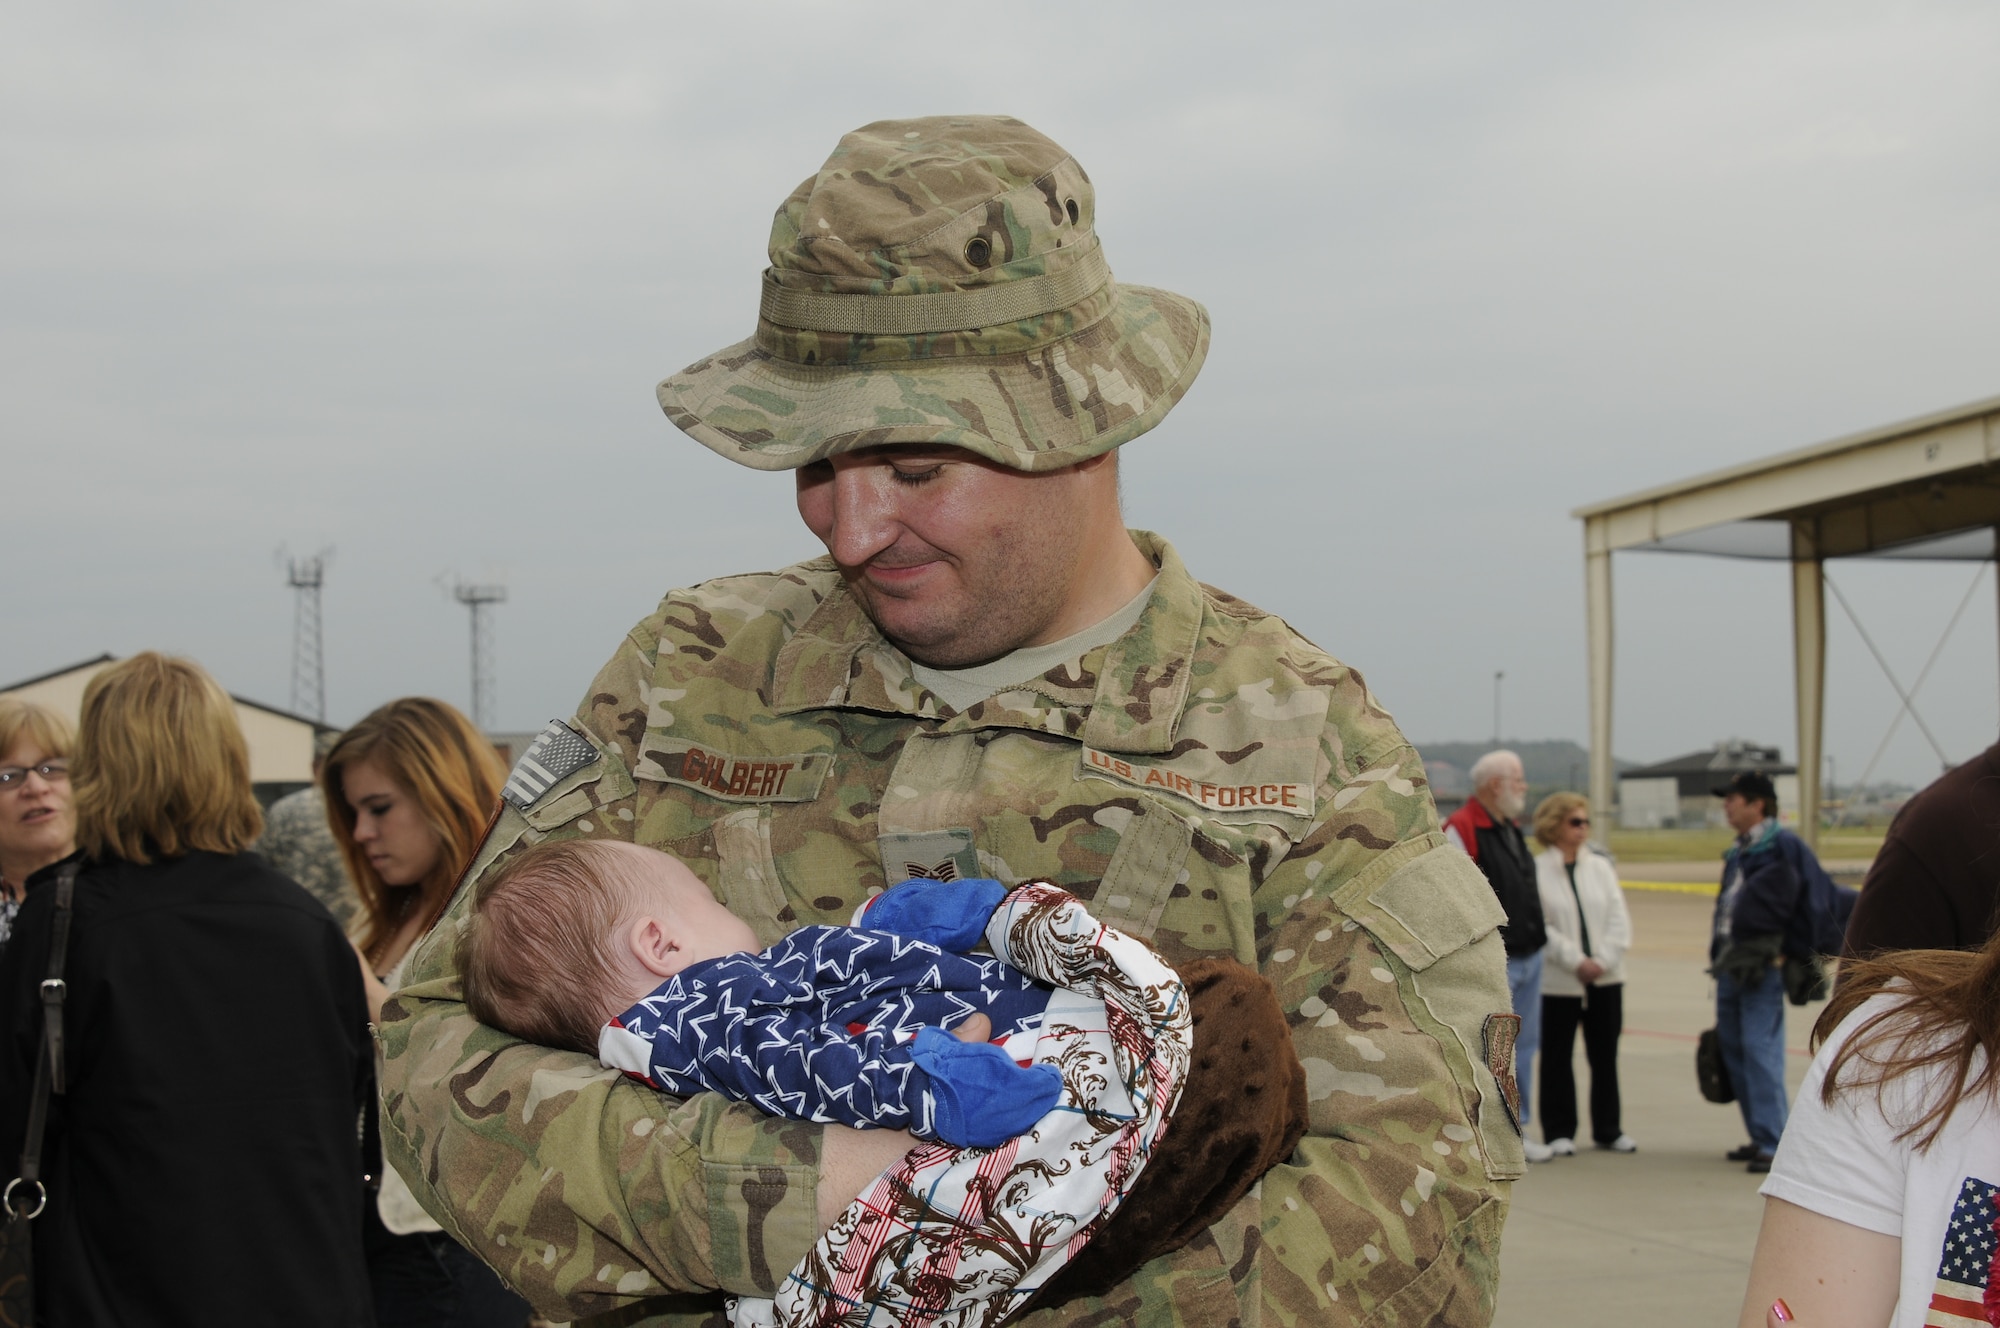 Staff Sgt. Billy Gilbert holds his son, Elijah, for the first time upon returning from a deployment to Afghanistan on Oct. 12, 2012. Approximately 280 Airmen with the 188th Fighter Wing returned to Fort Smith, Ark., from a deployment to Bagram Airfield, Afghanistan Oct. 12. (National Guard photo by Senior Airman Hannah Landeros/188th Fighter Wing Public Affairs)